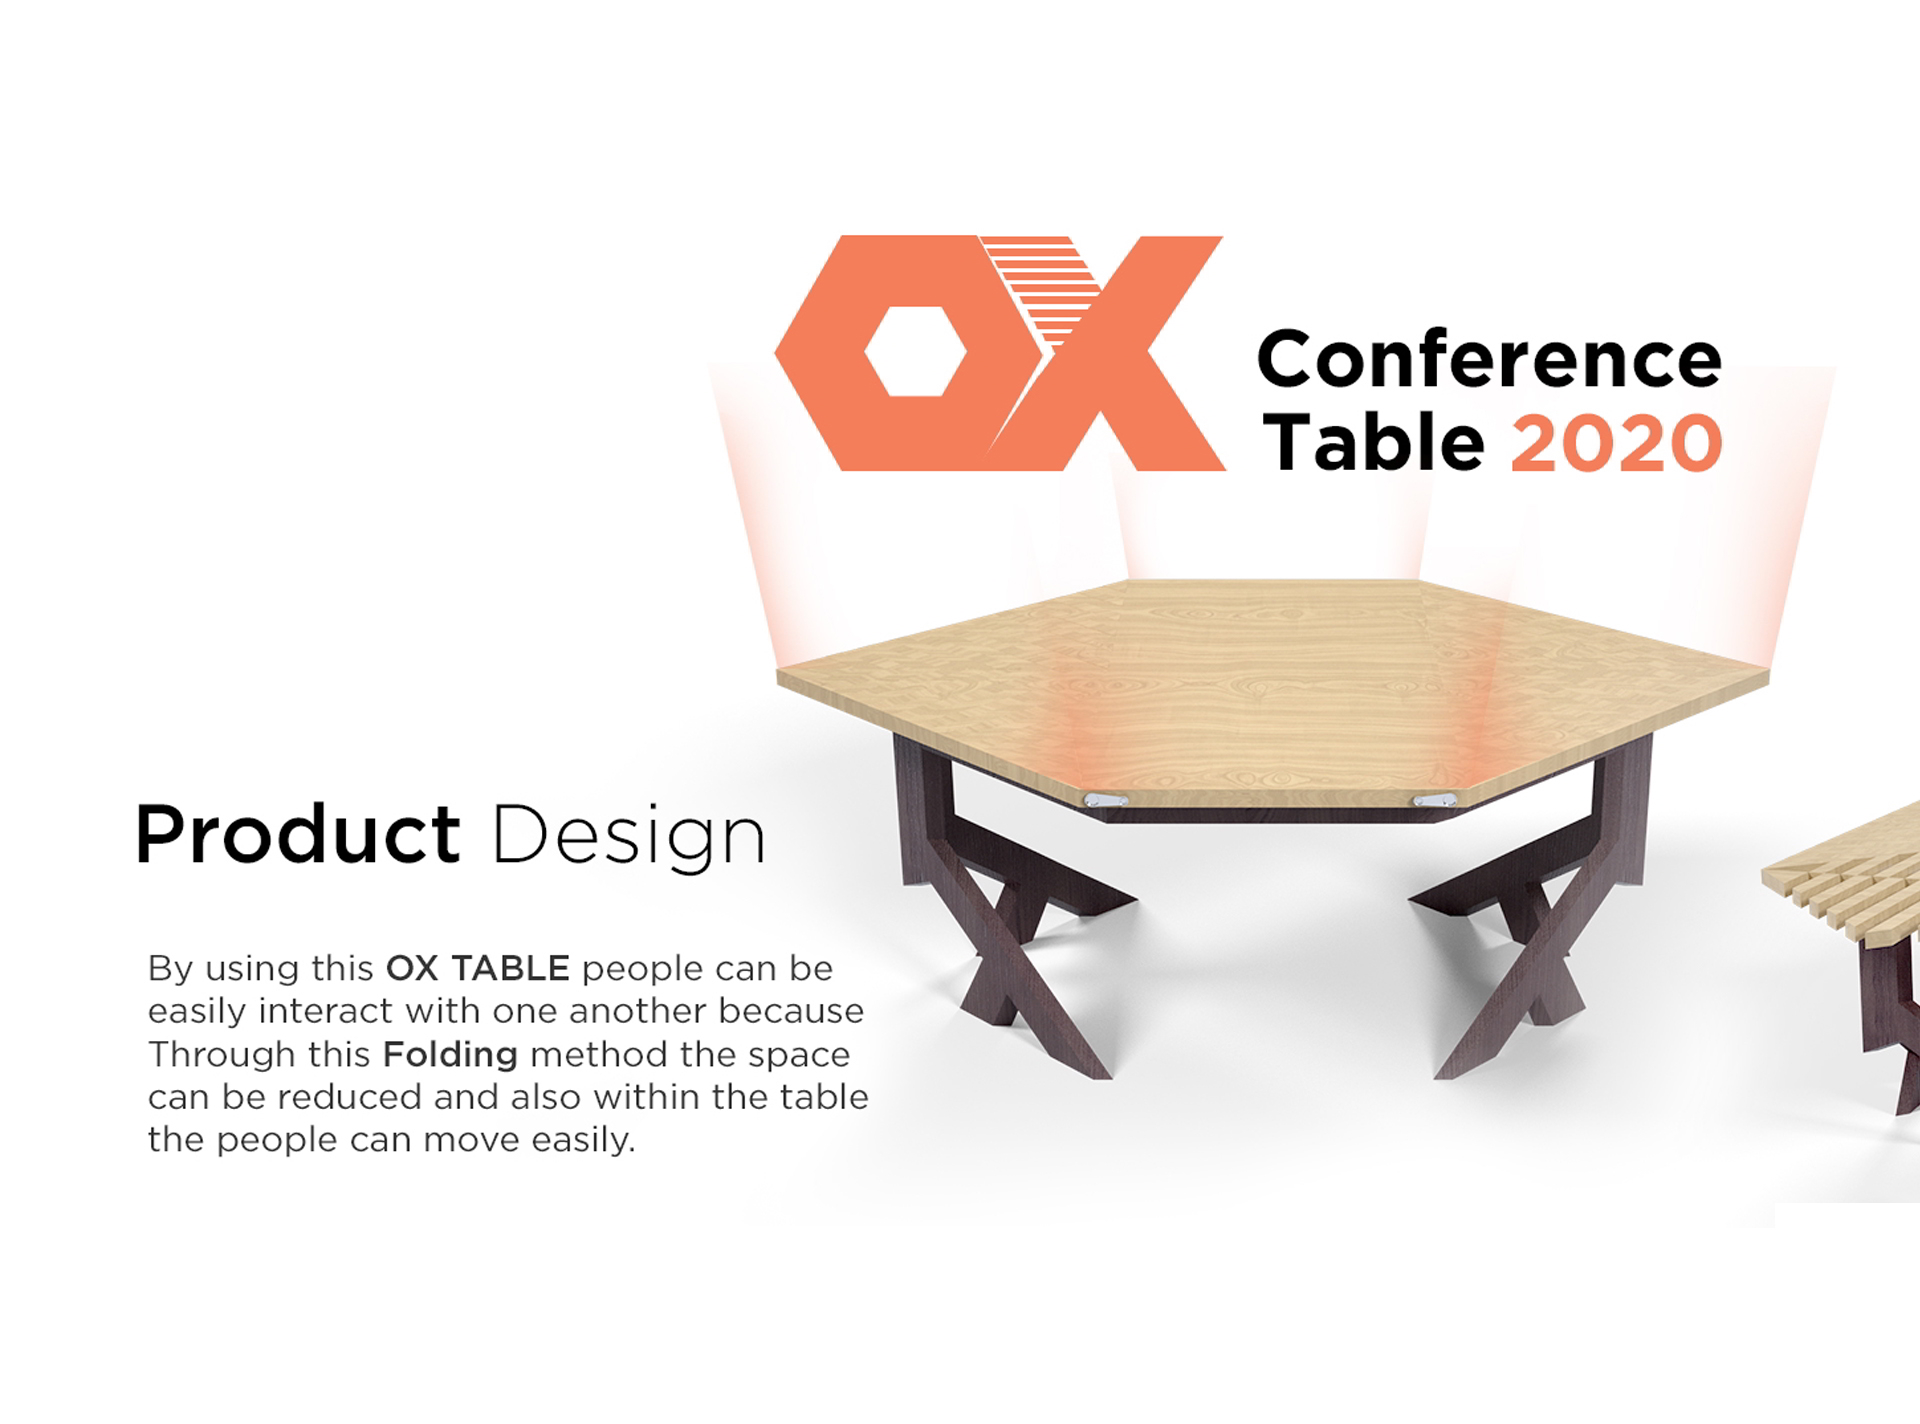 OX conference table - Product design